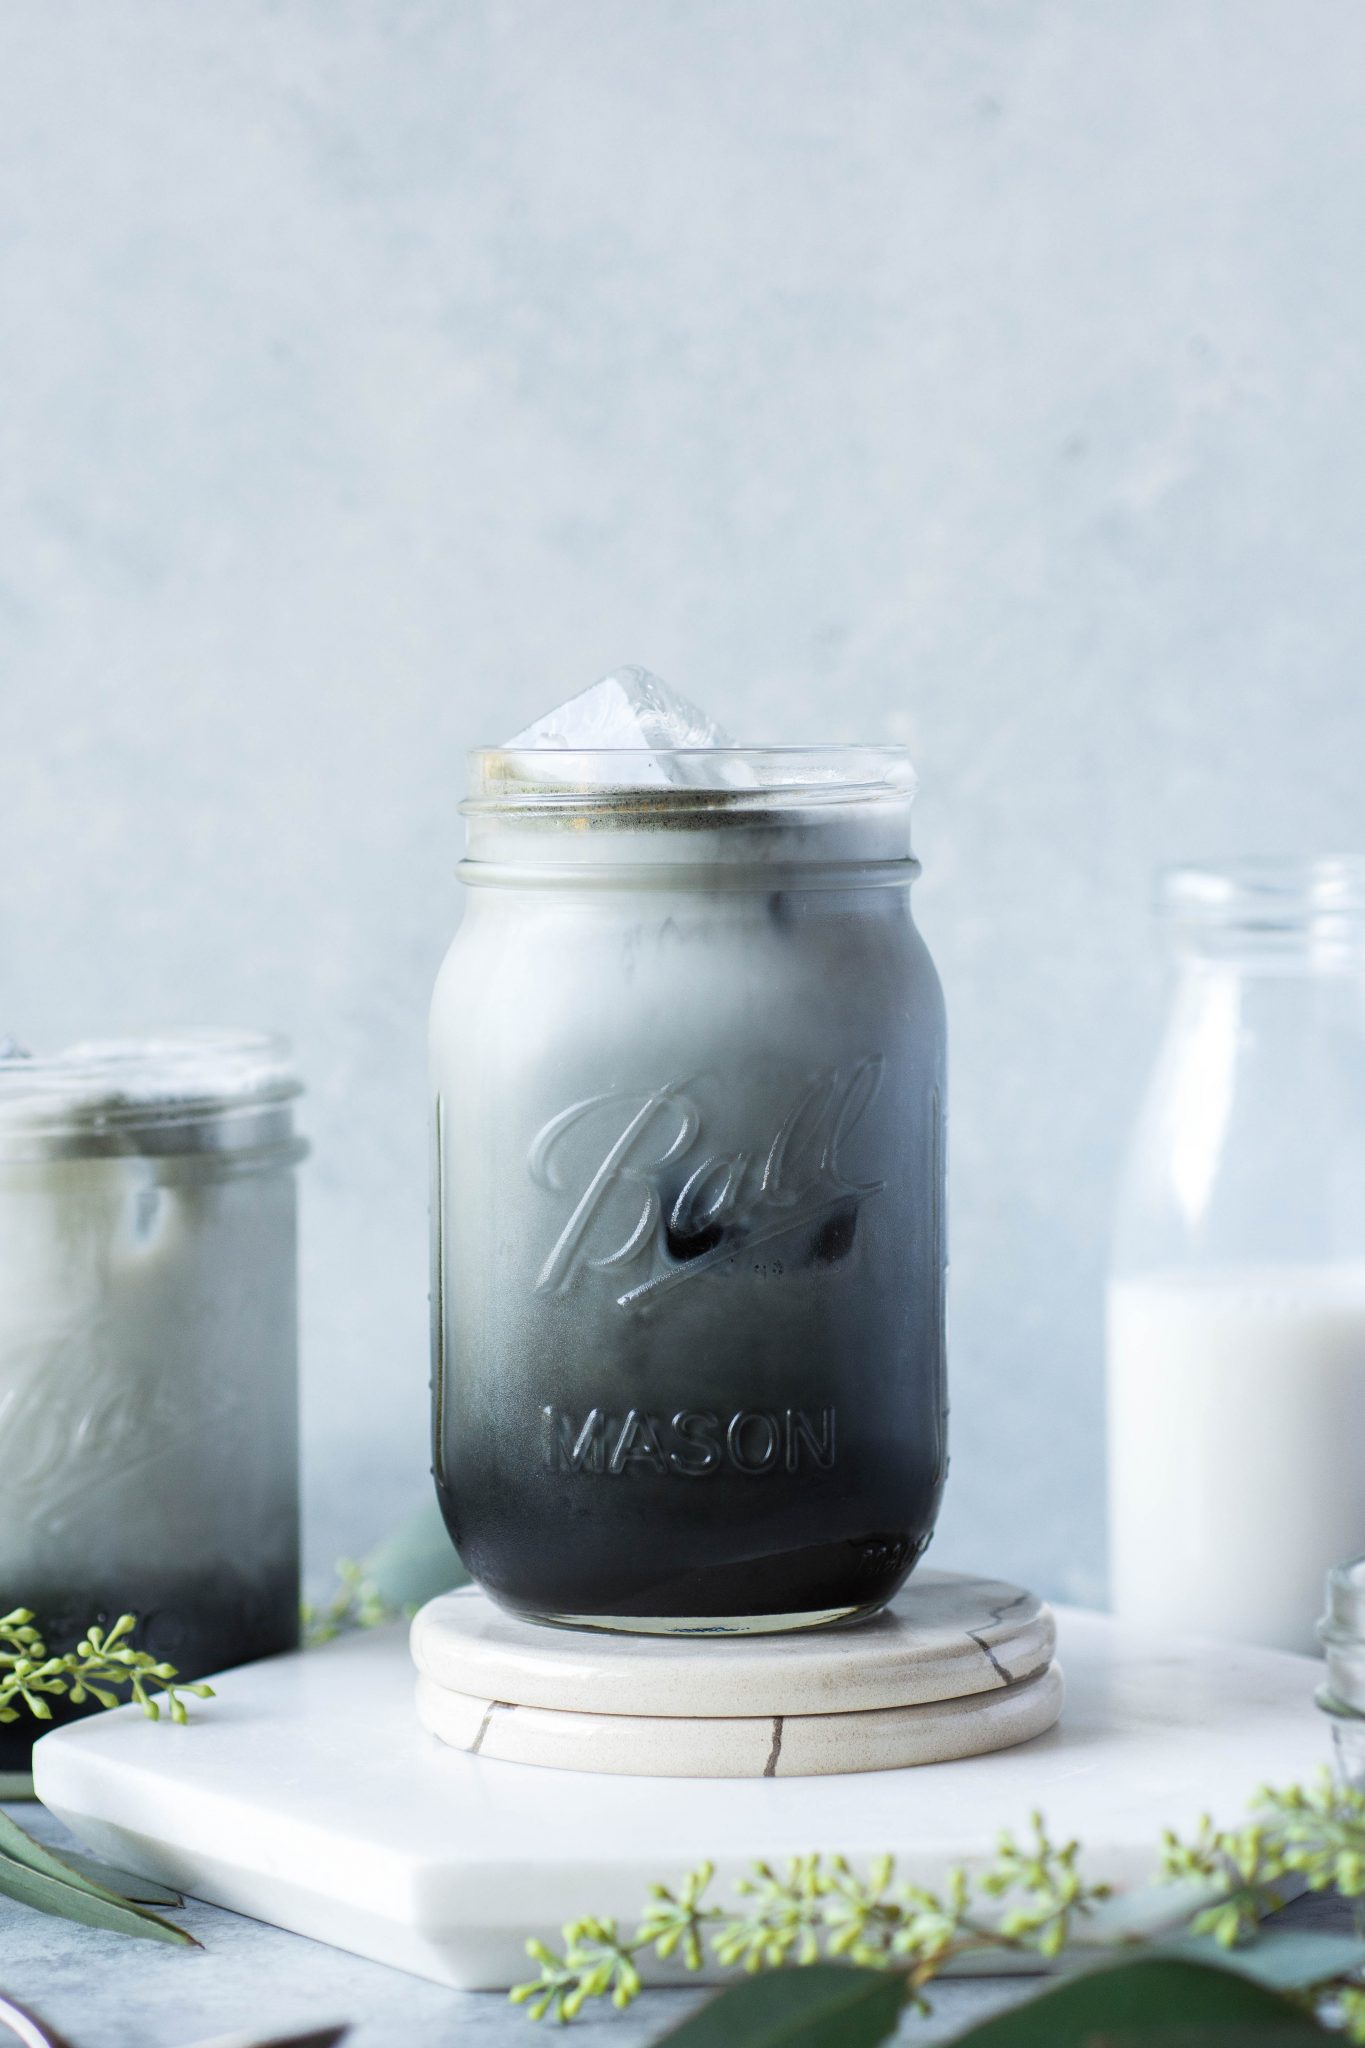 Black and grey toned iced charcoal and almond milk latte in a mason jar, on a grey / blue background.